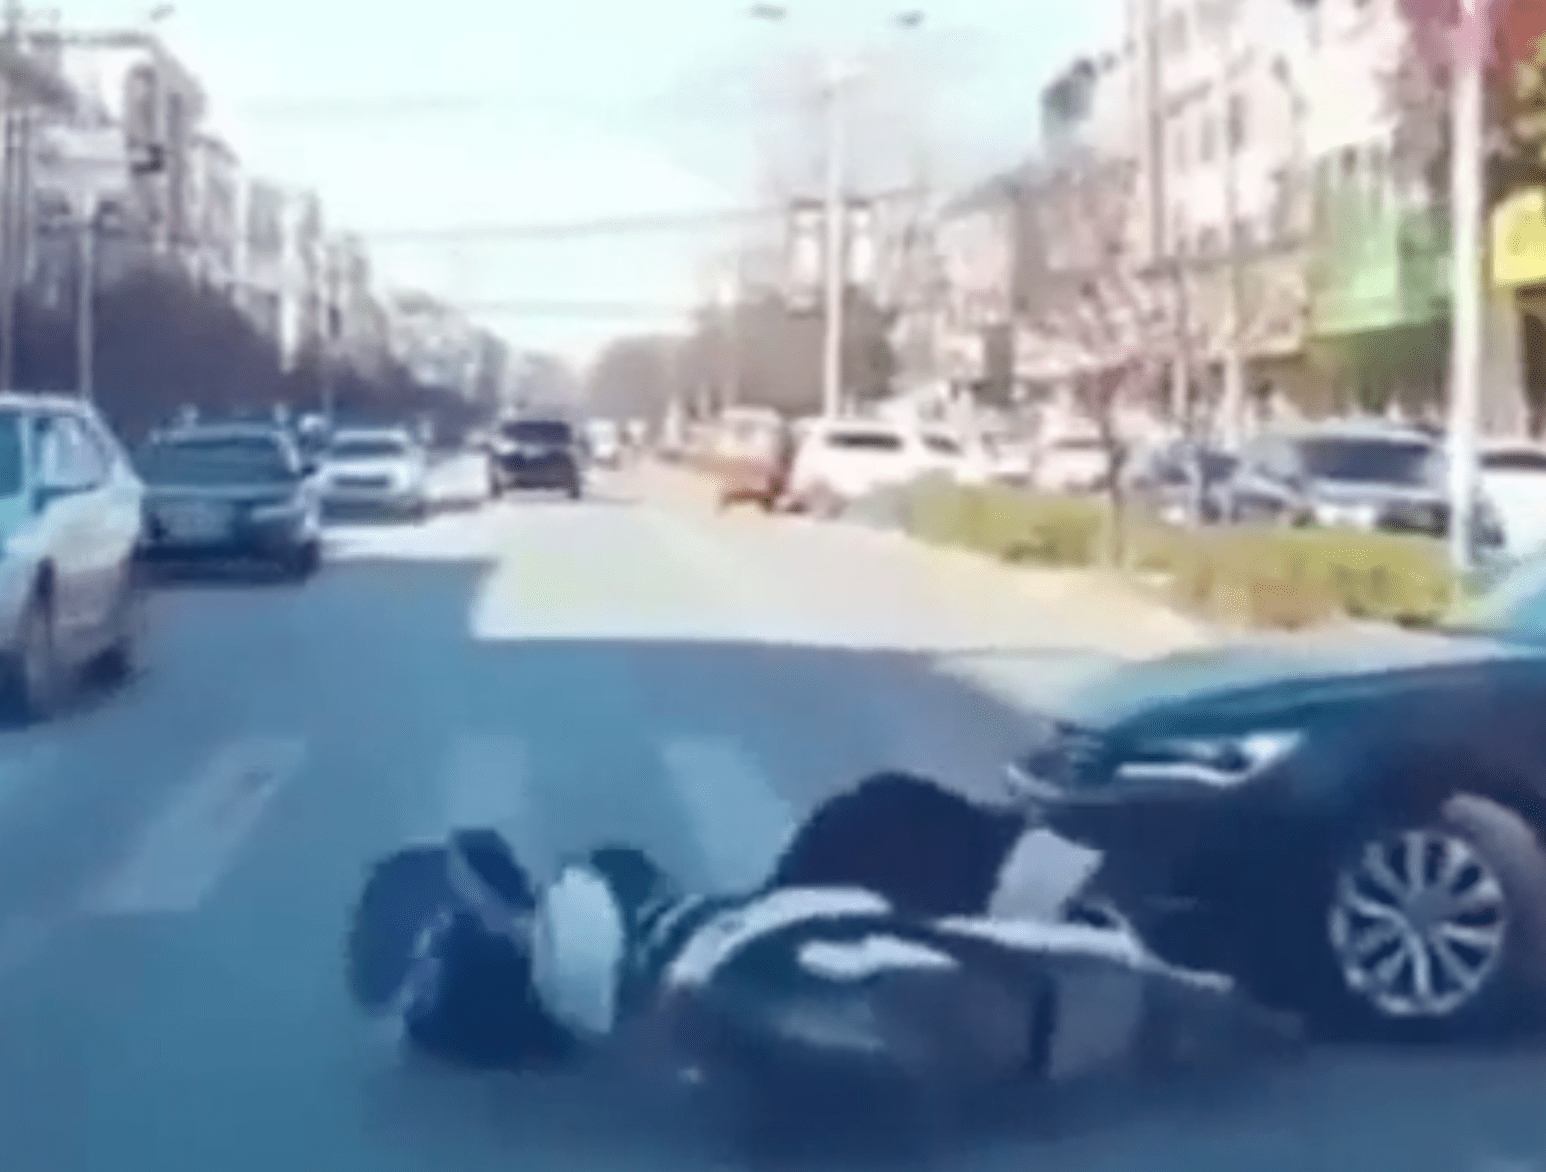 Woman in the middle of an accident scene | Photo: Reddit/Whatcouldgowrong